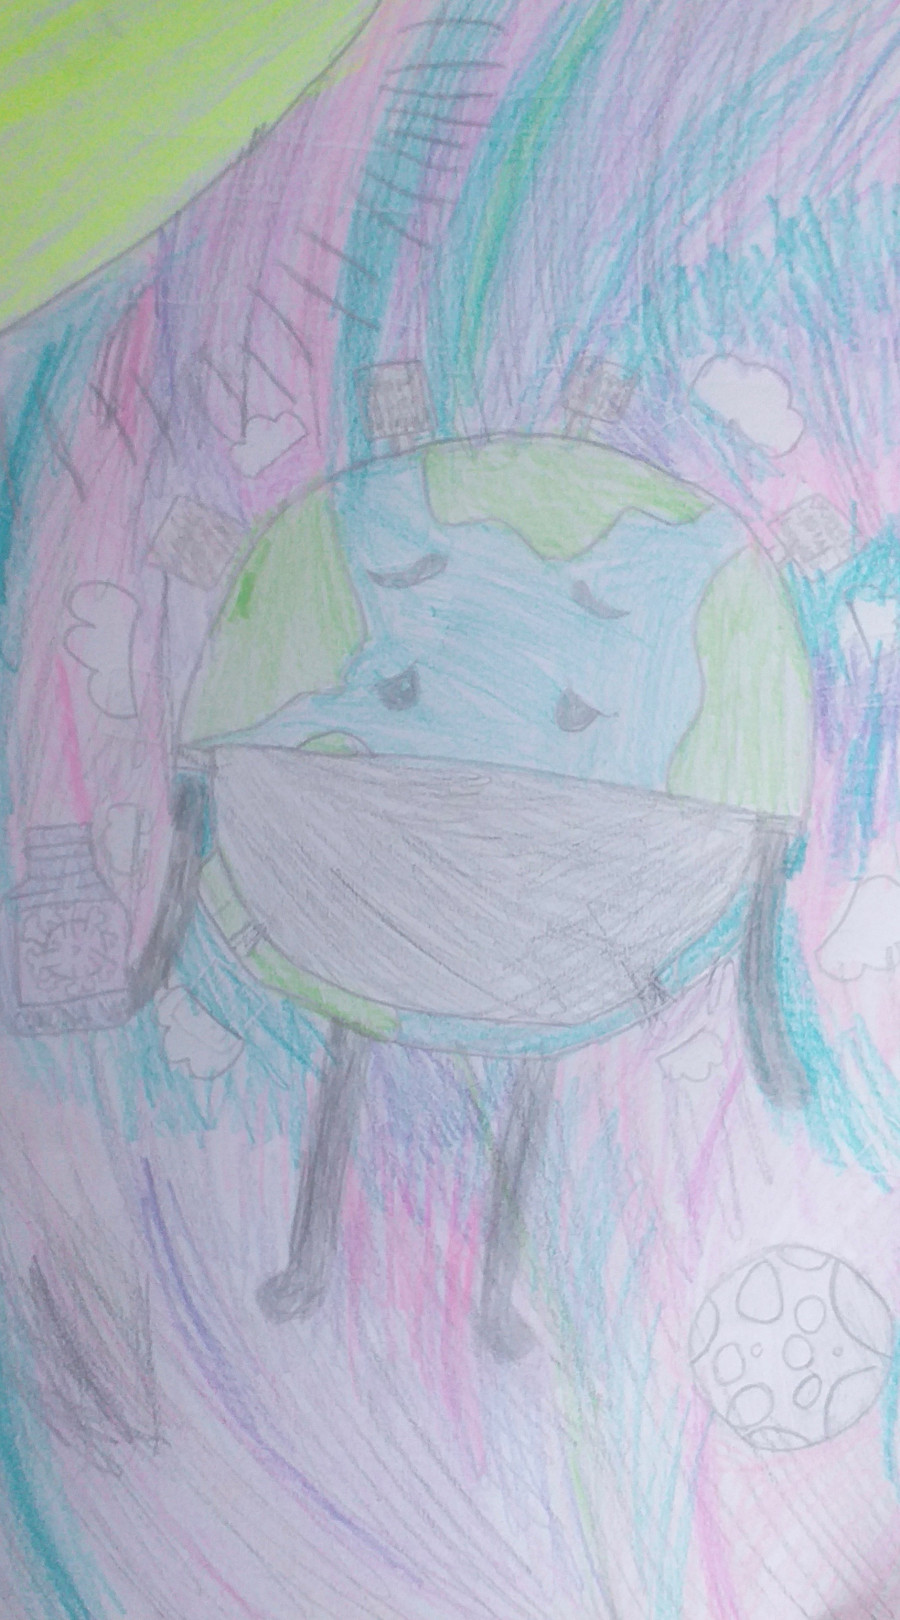 'The World with a Mask' by Jack (10) from Cork